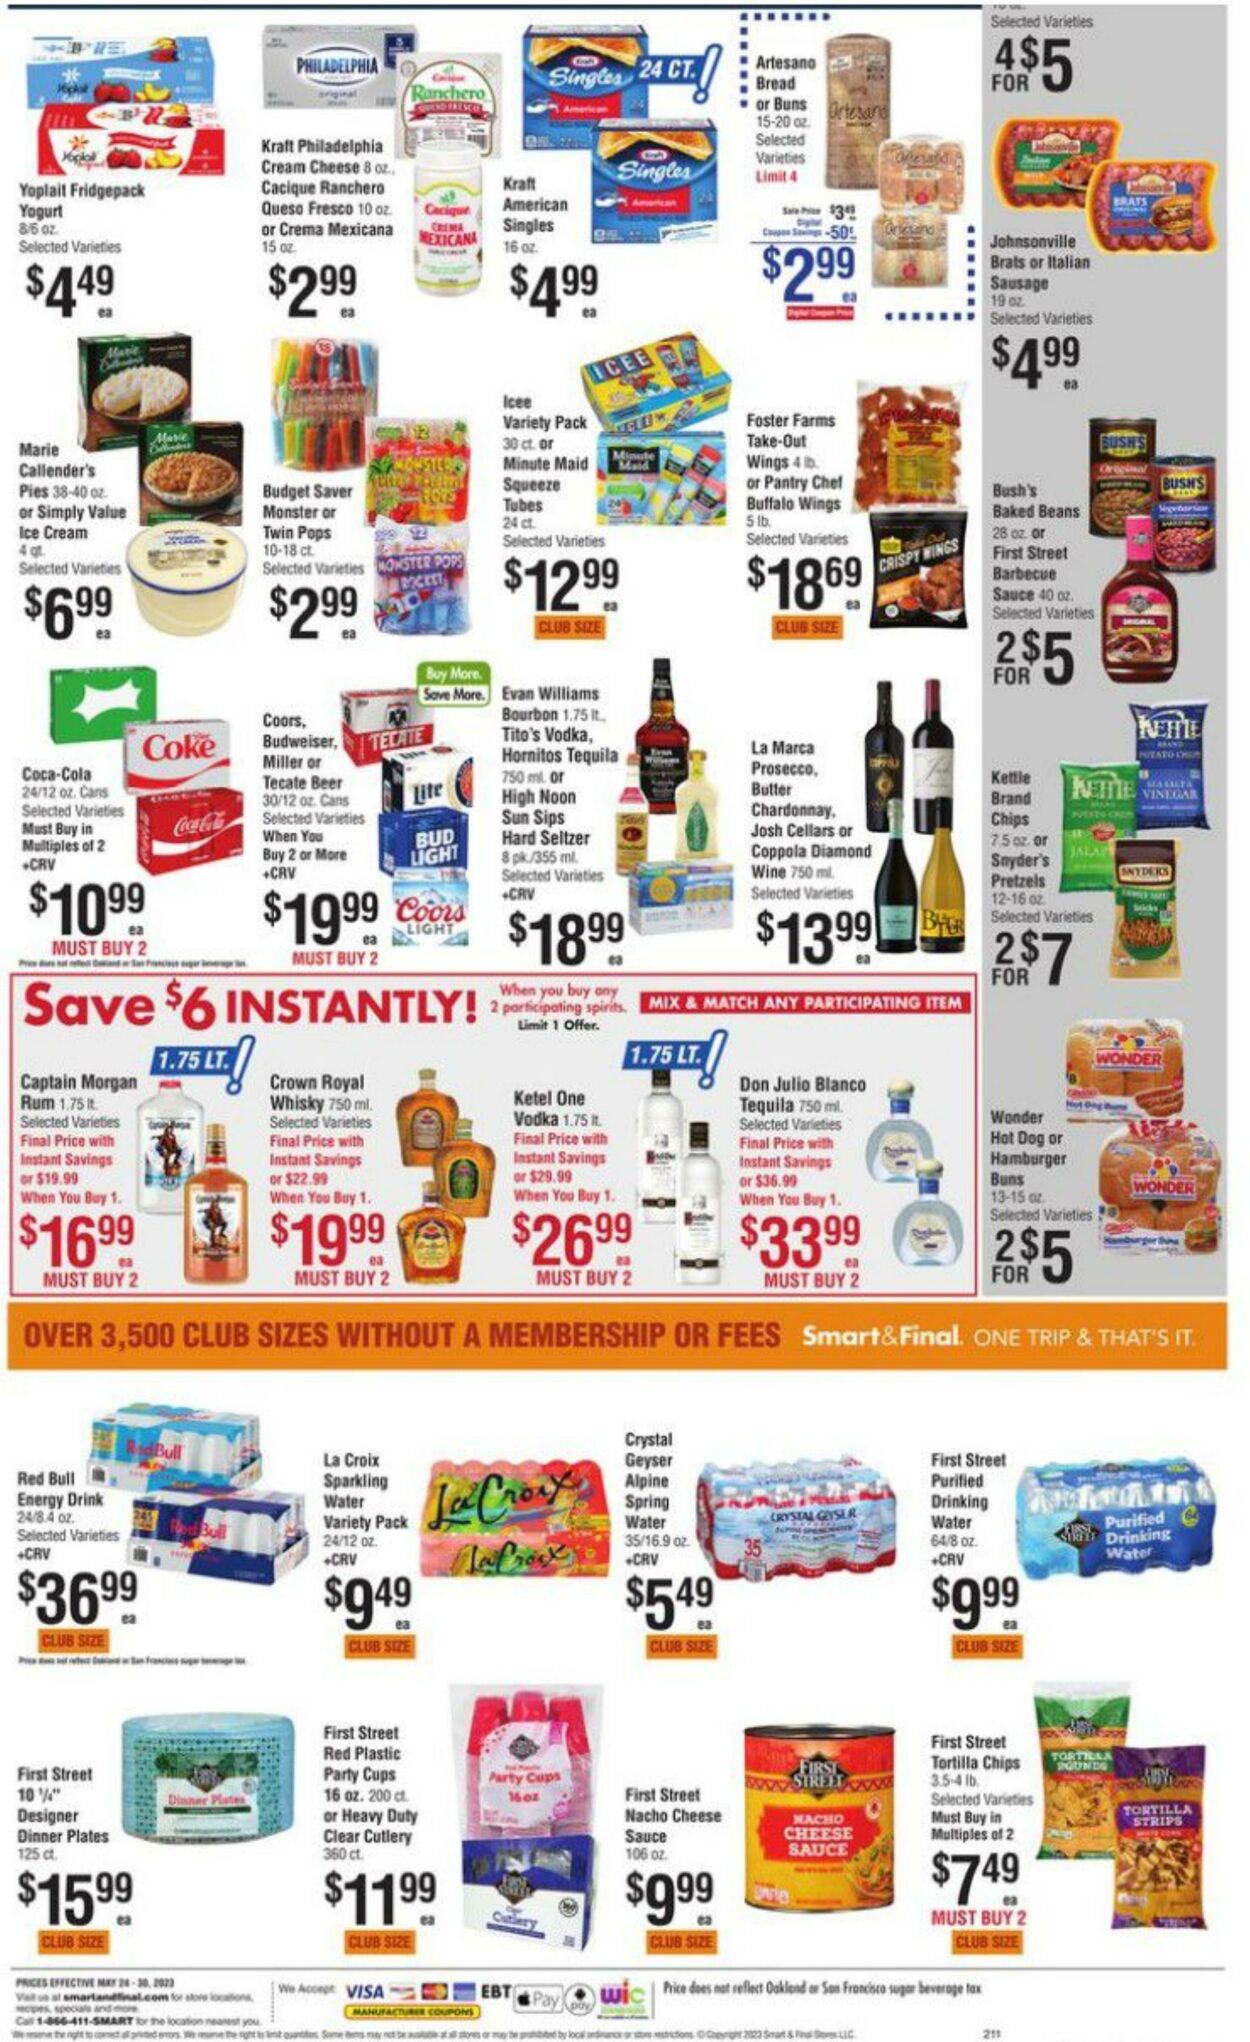 Weekly ad Smart and Final 05/24/2023 - 05/30/2023